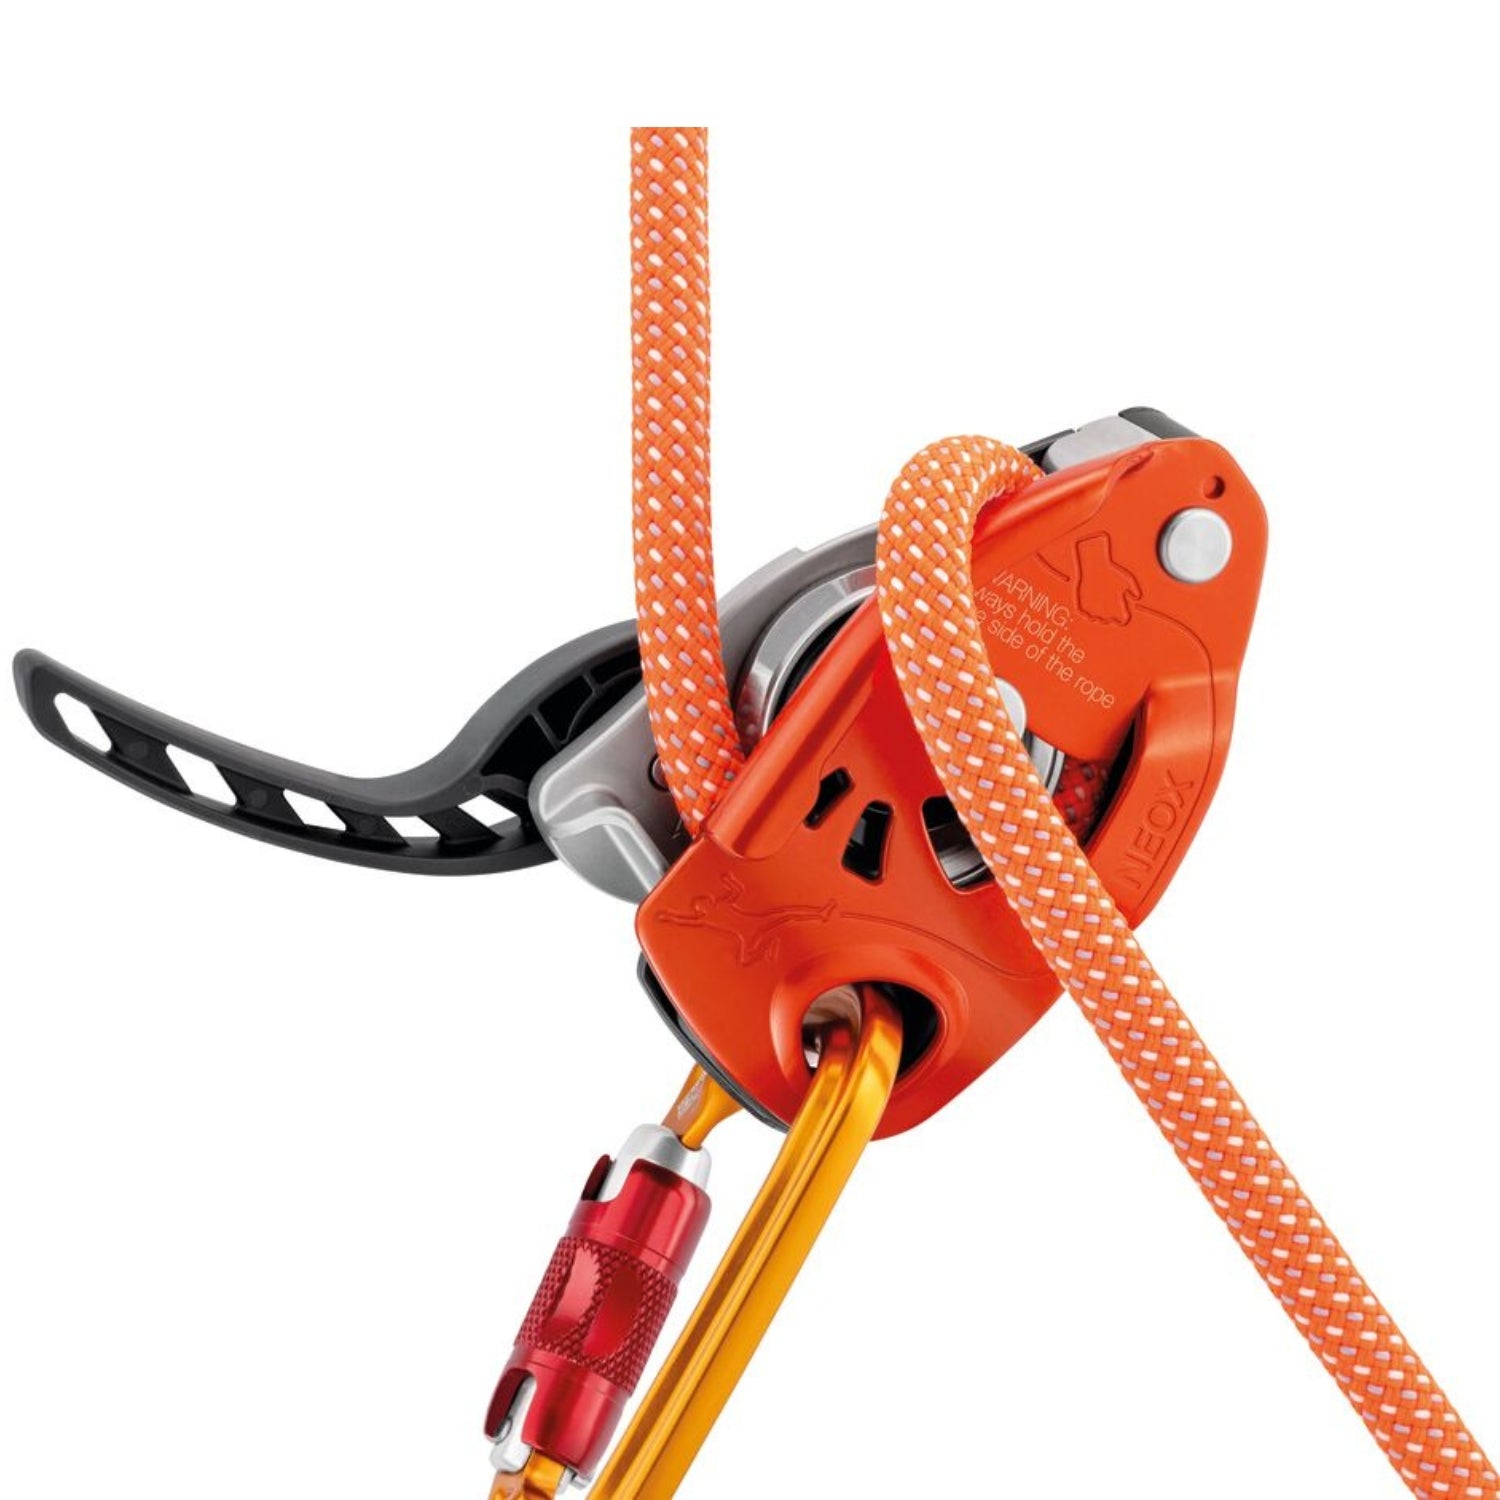 Petzl Neox orange assisted belay device